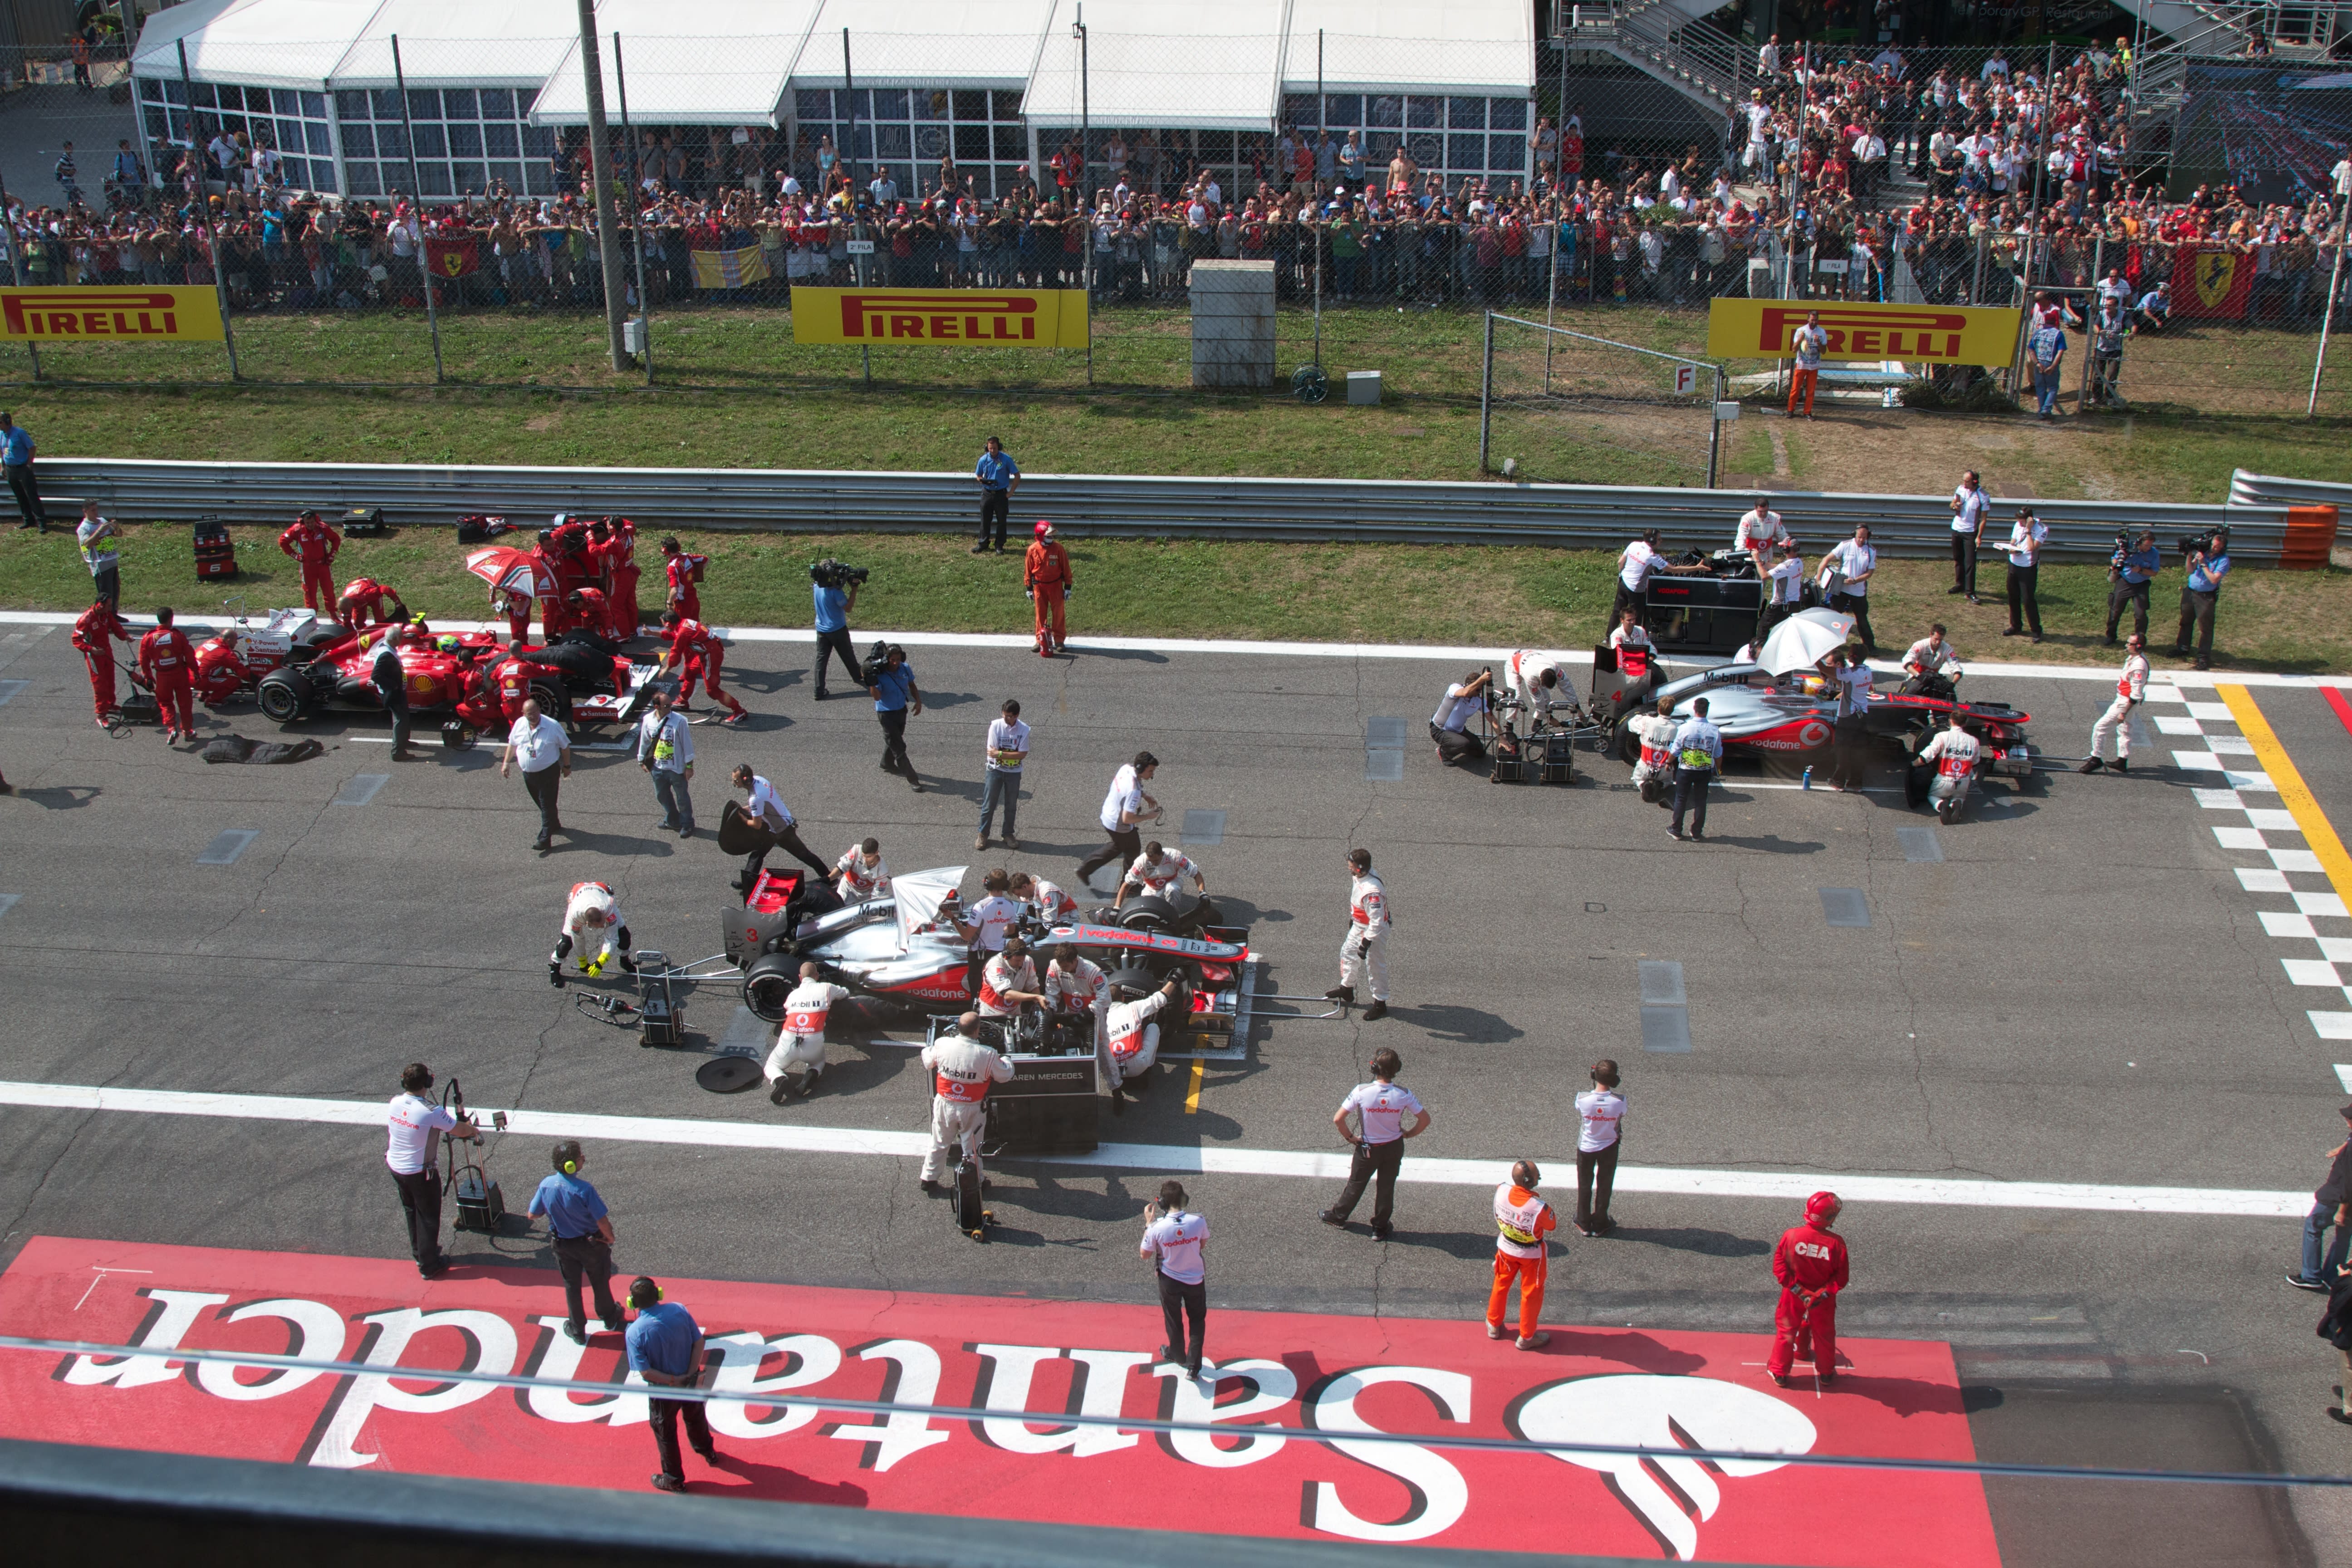 McLaren-Mercedes lock-out the front row of the 2012 Monza Grand Prix with a Ferrari starting in third